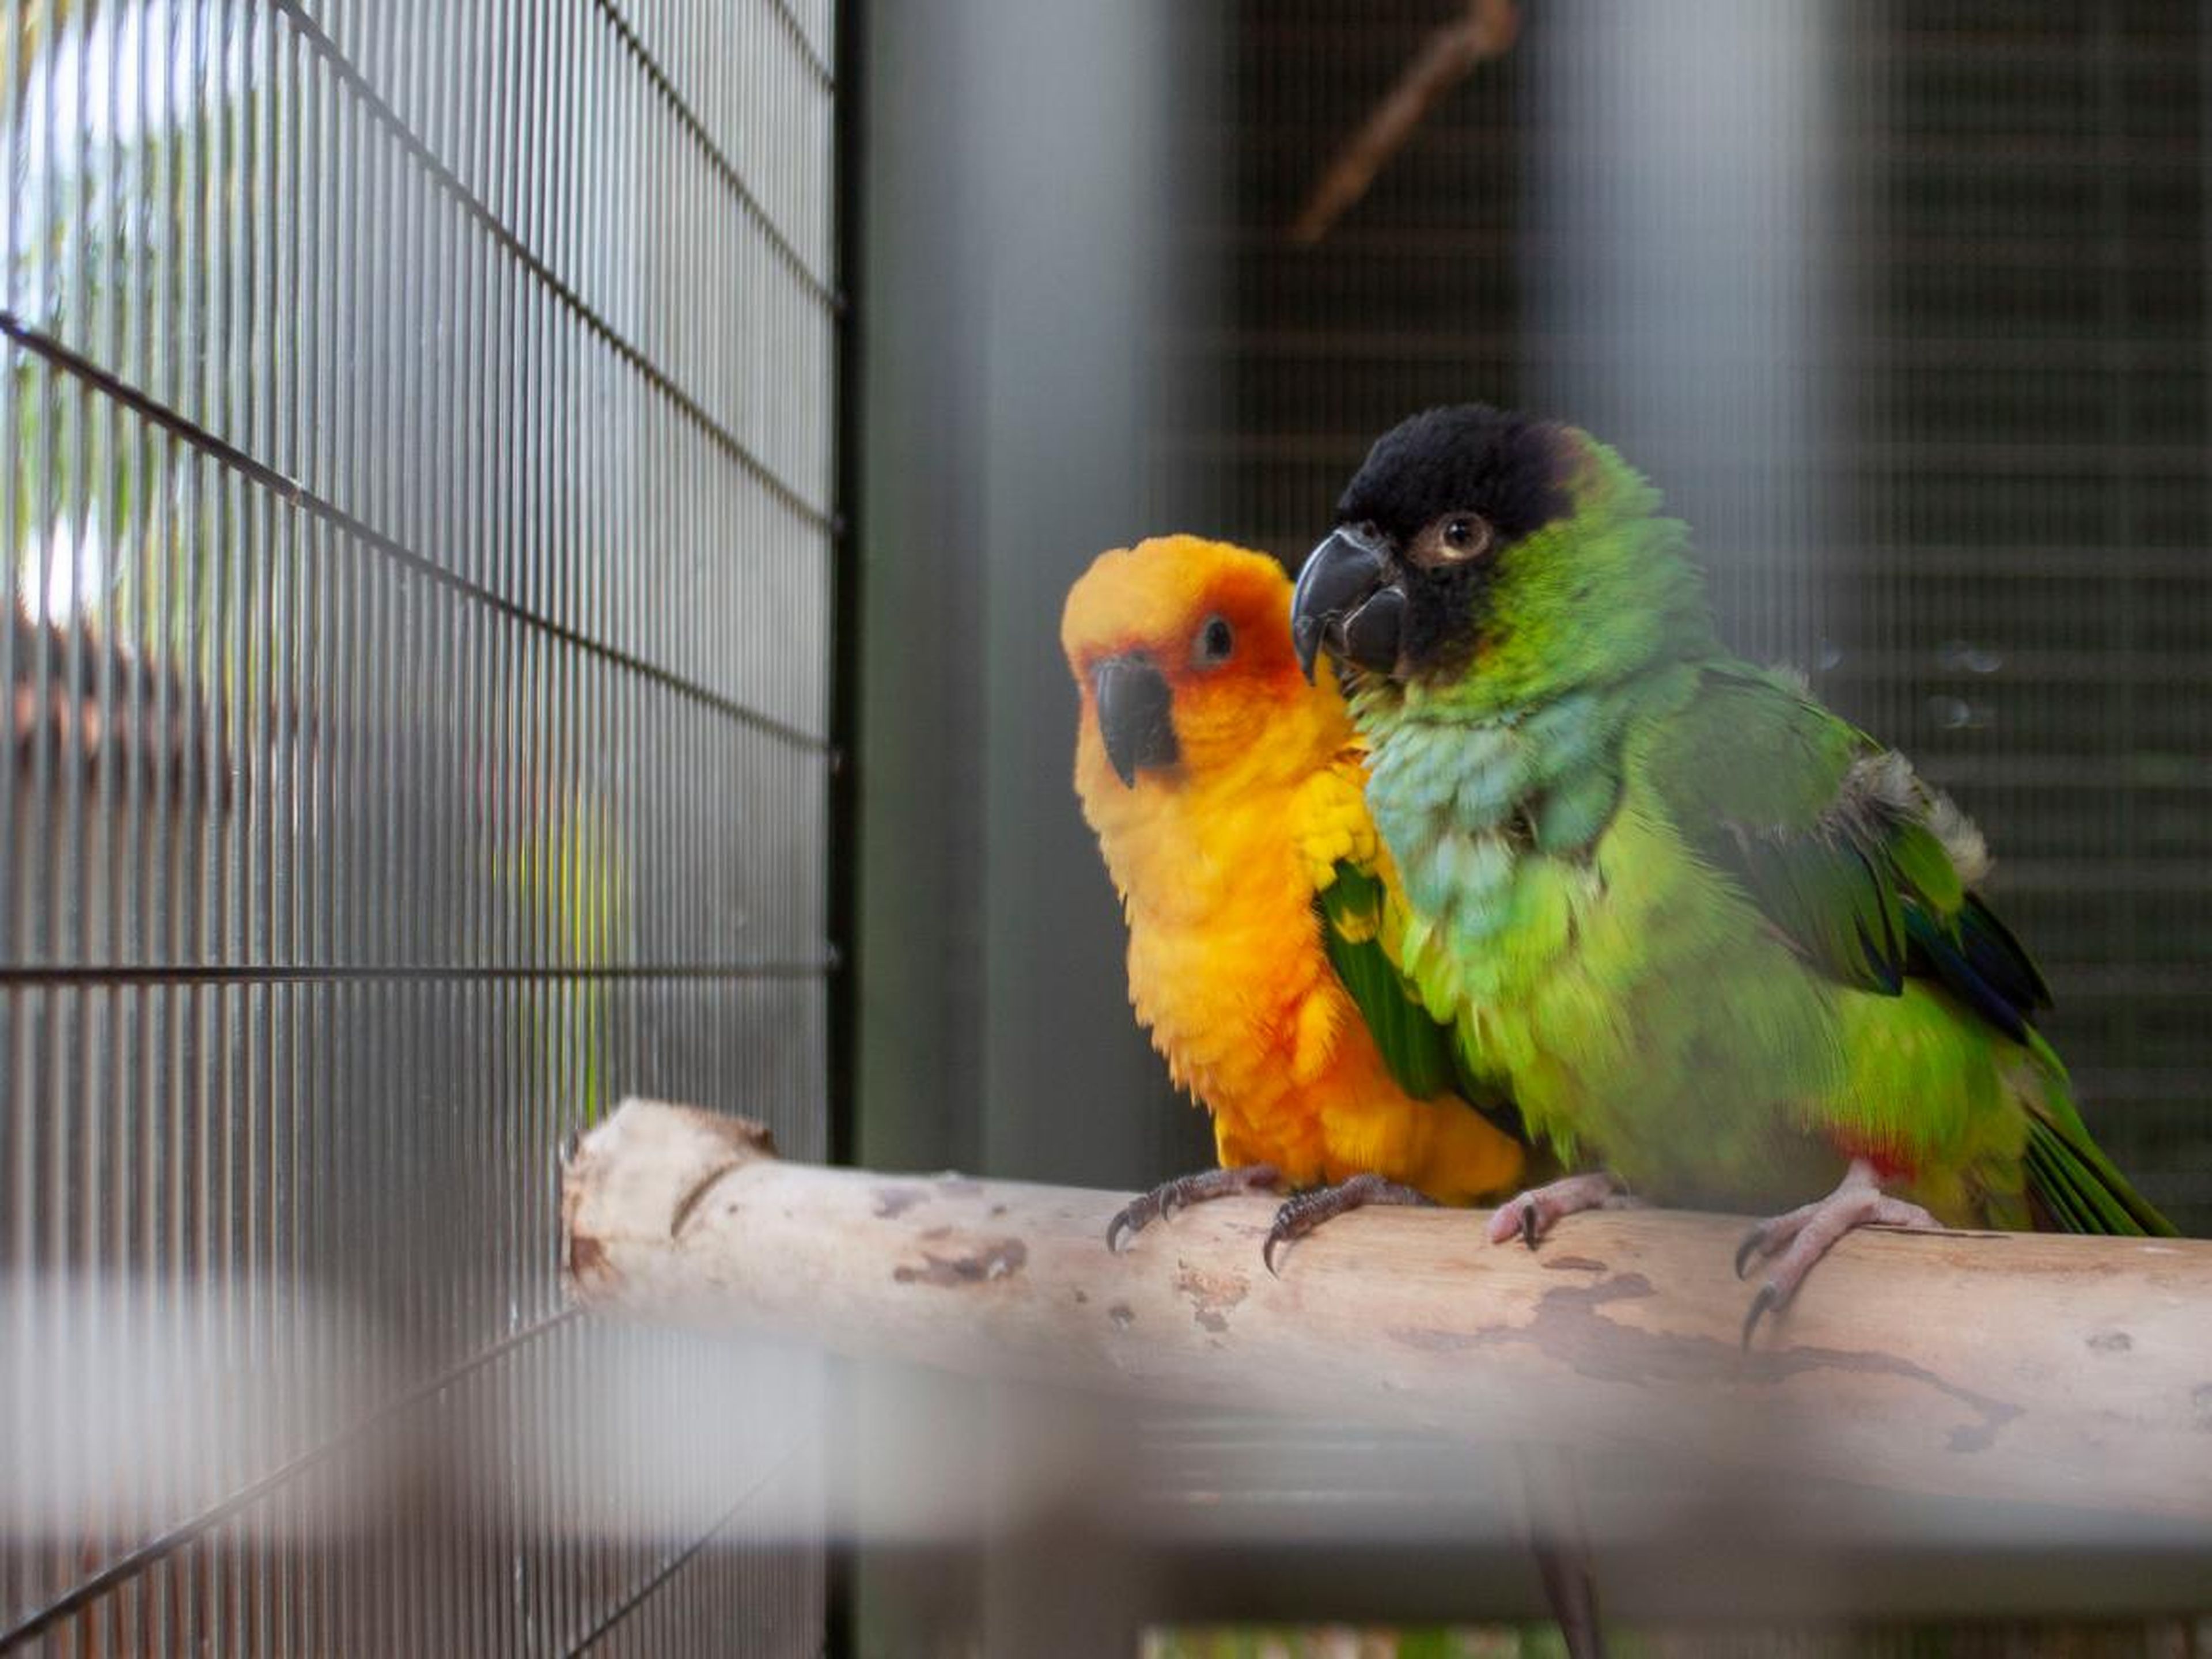 The island even has its own private aviary full of exotic birds.